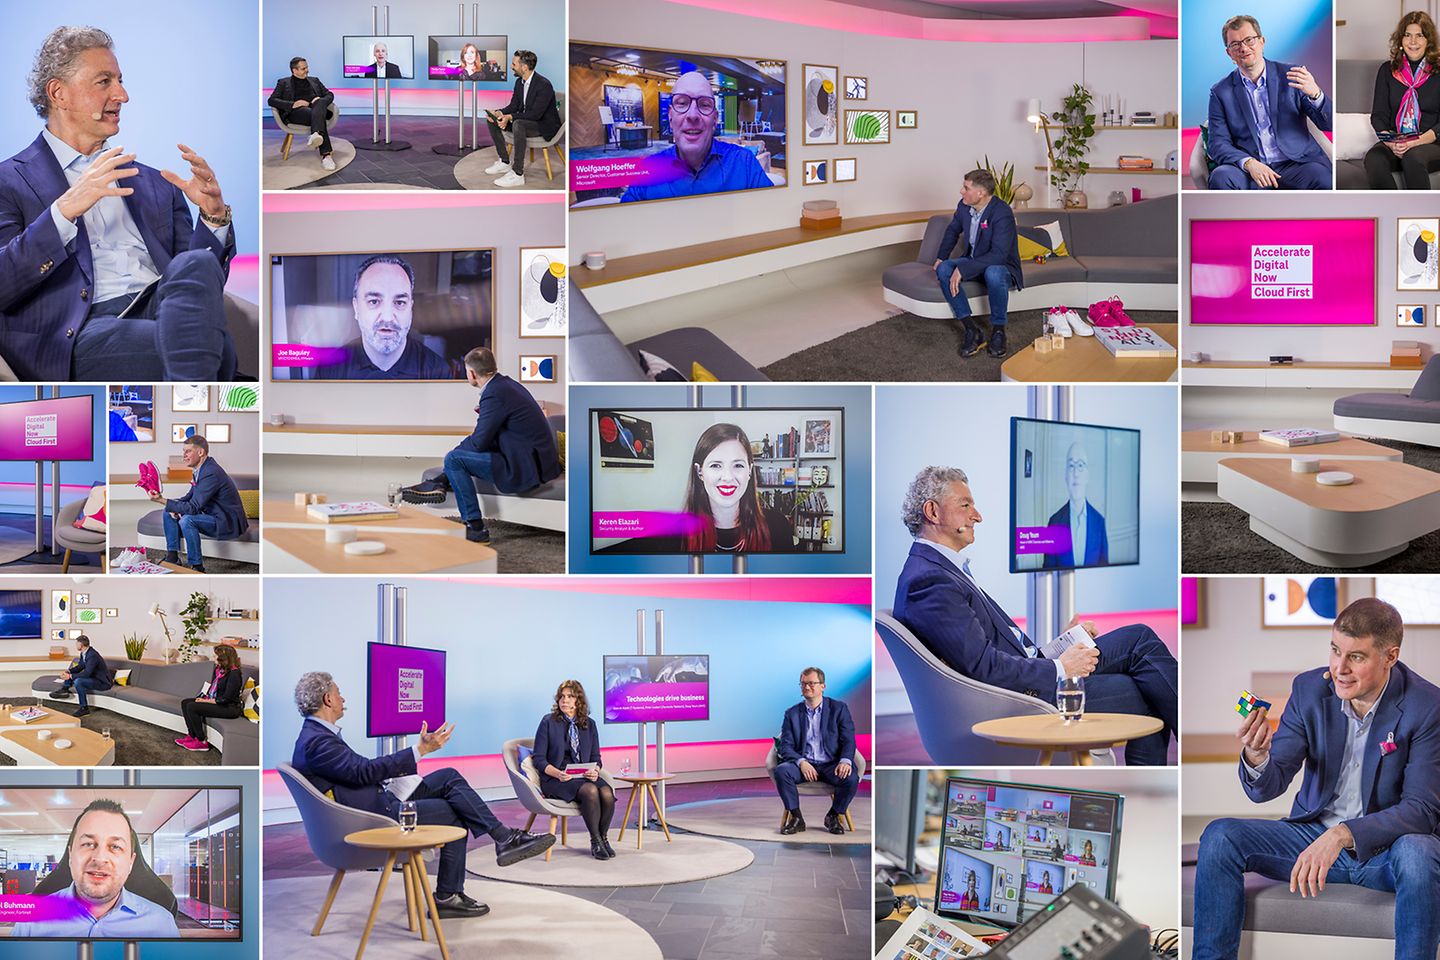 A collage of pictures from the online event with the participating guests